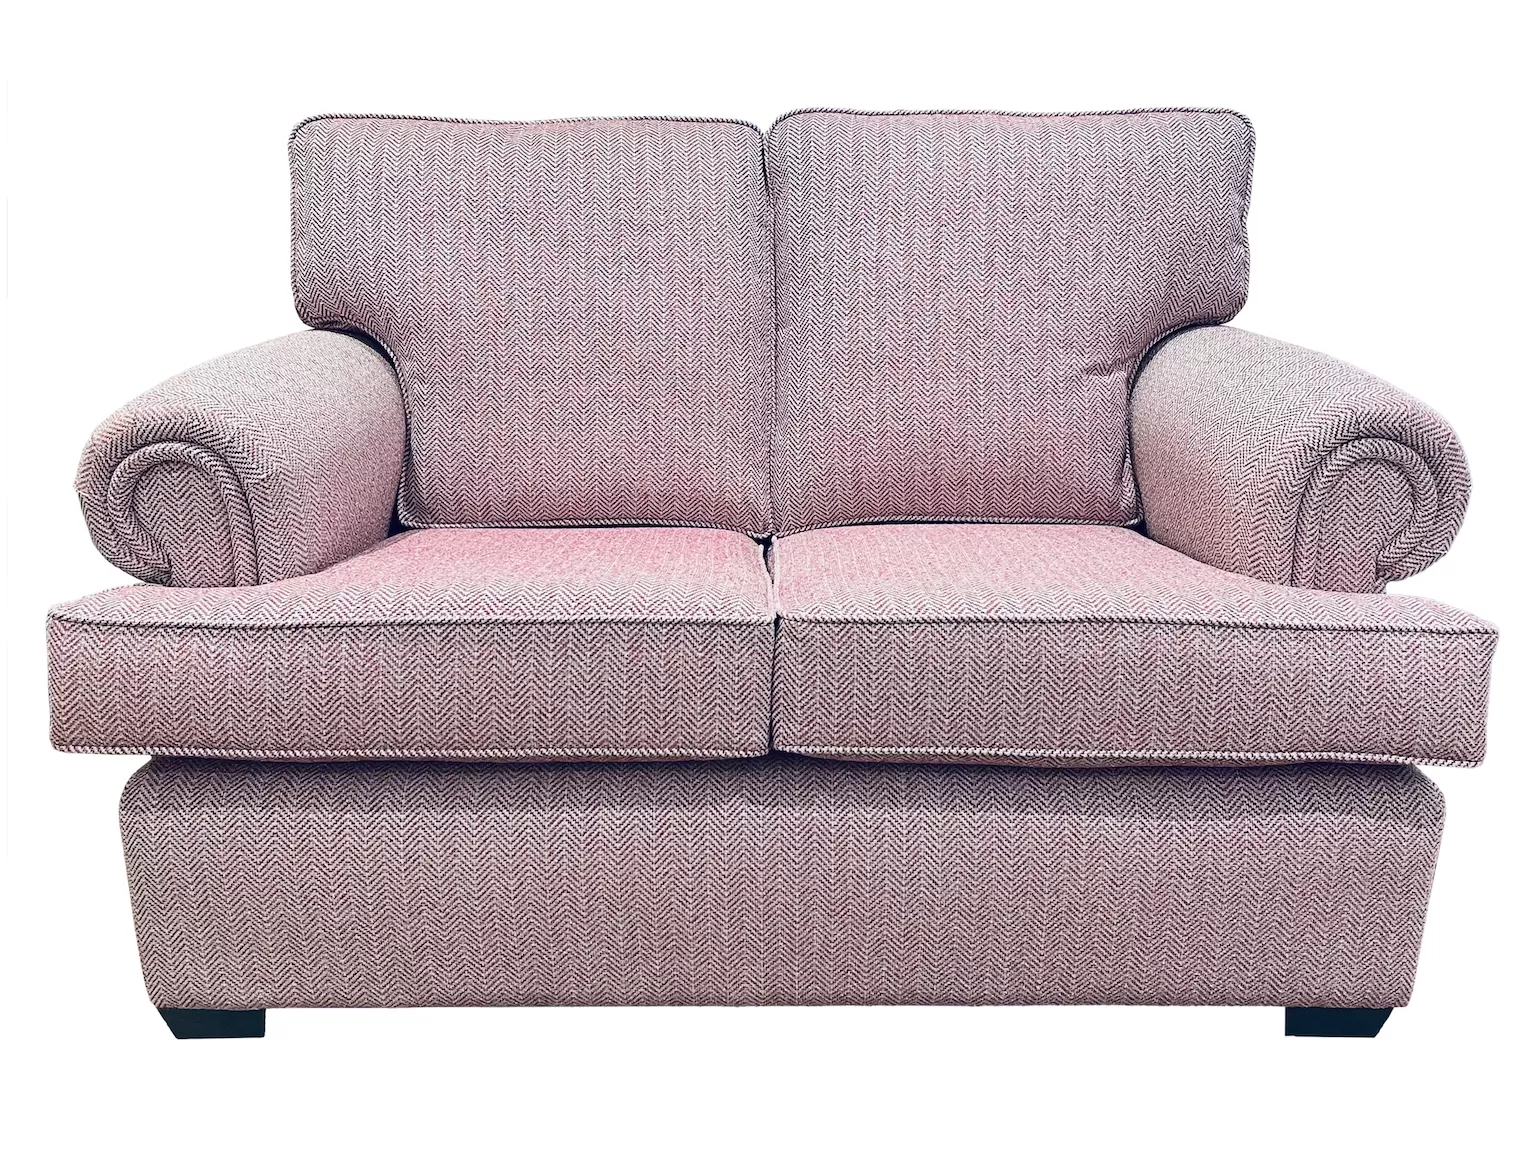 A modern range of furniture similar to the Chatsworth range. These sofas and chairs have a set back scroll arm enhanced by “T” cushions, with high back cushions, ensuring both a comfortable and aesthetically pleasing comfort.
